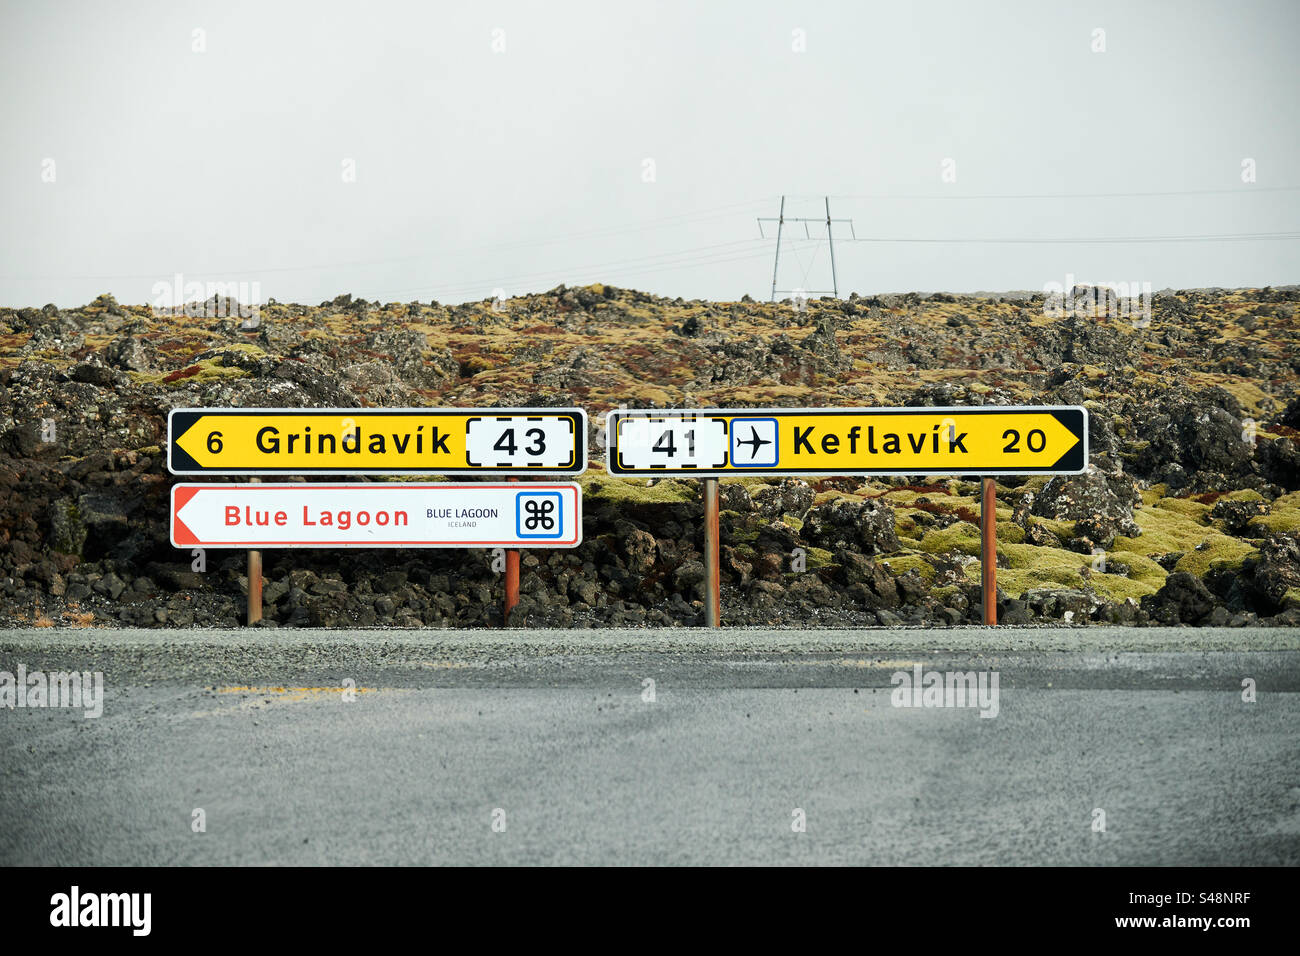 A road sign in Iceland points the way towards Grindavik, Blue lagoon, and Keflavik situated in Svartsengi. Lots of lava and moss behind it and a electric mast. Stock Photo